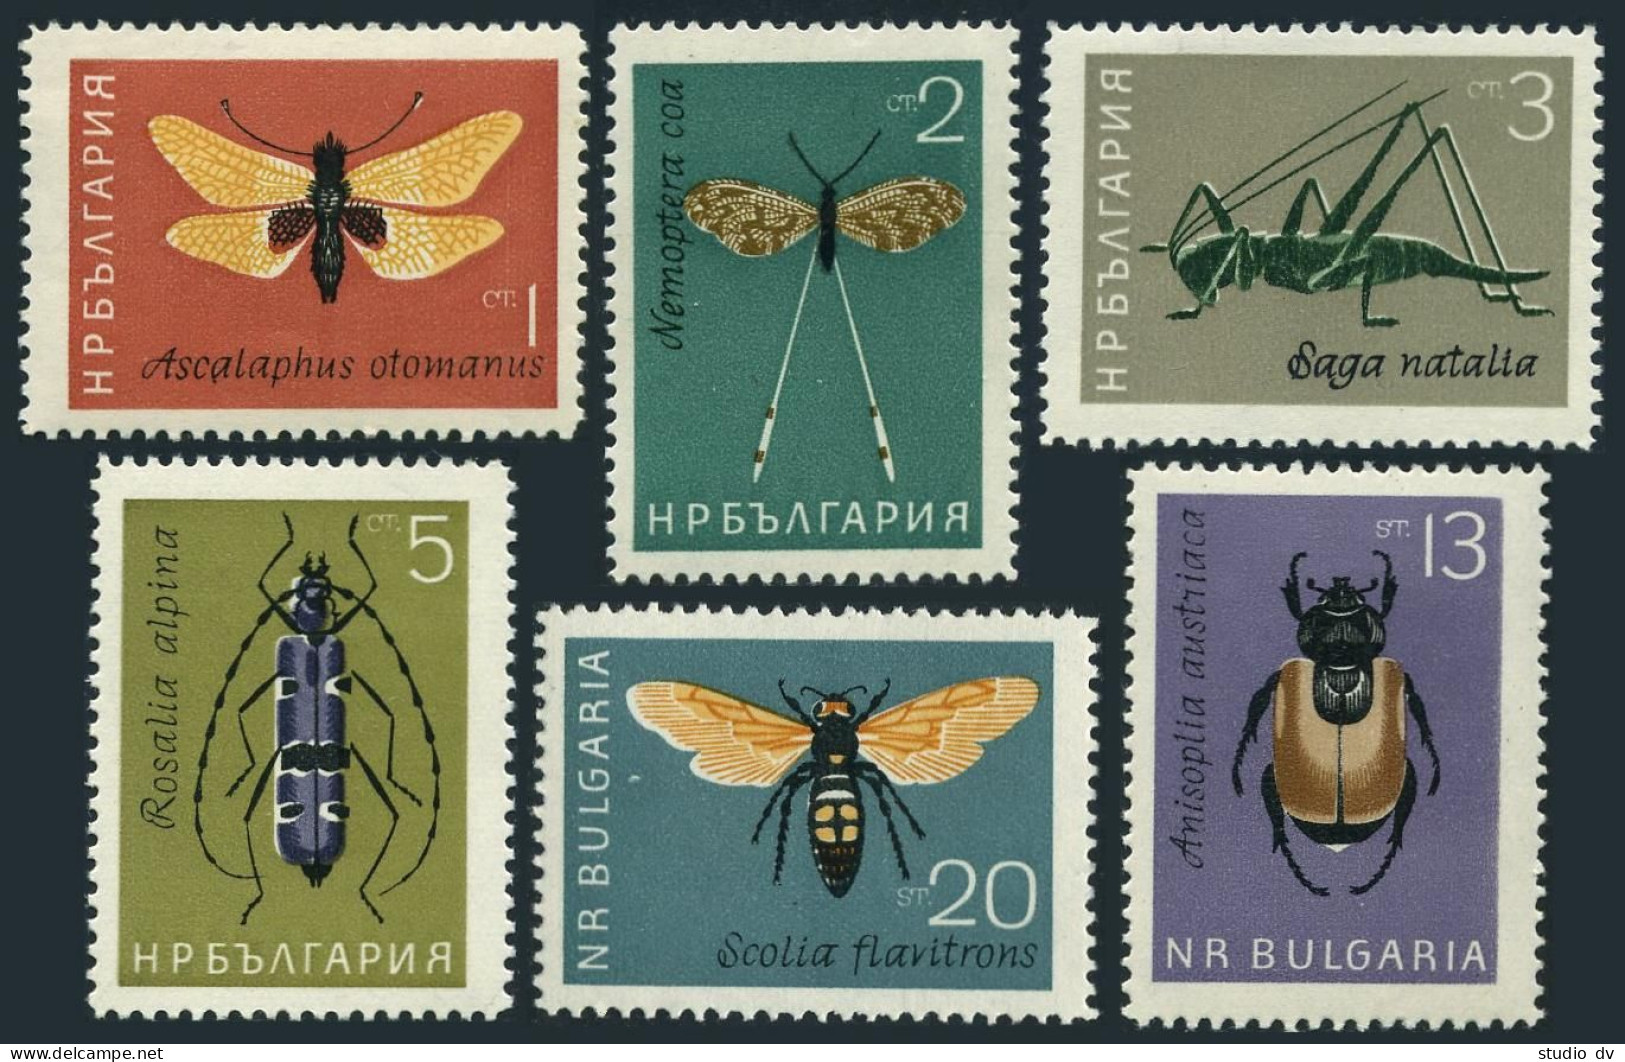 Bulgaria 1332-1337, MNH. Mi 1446-1451. Insects 1964. Butterflies, Grasshopper, - Unused Stamps